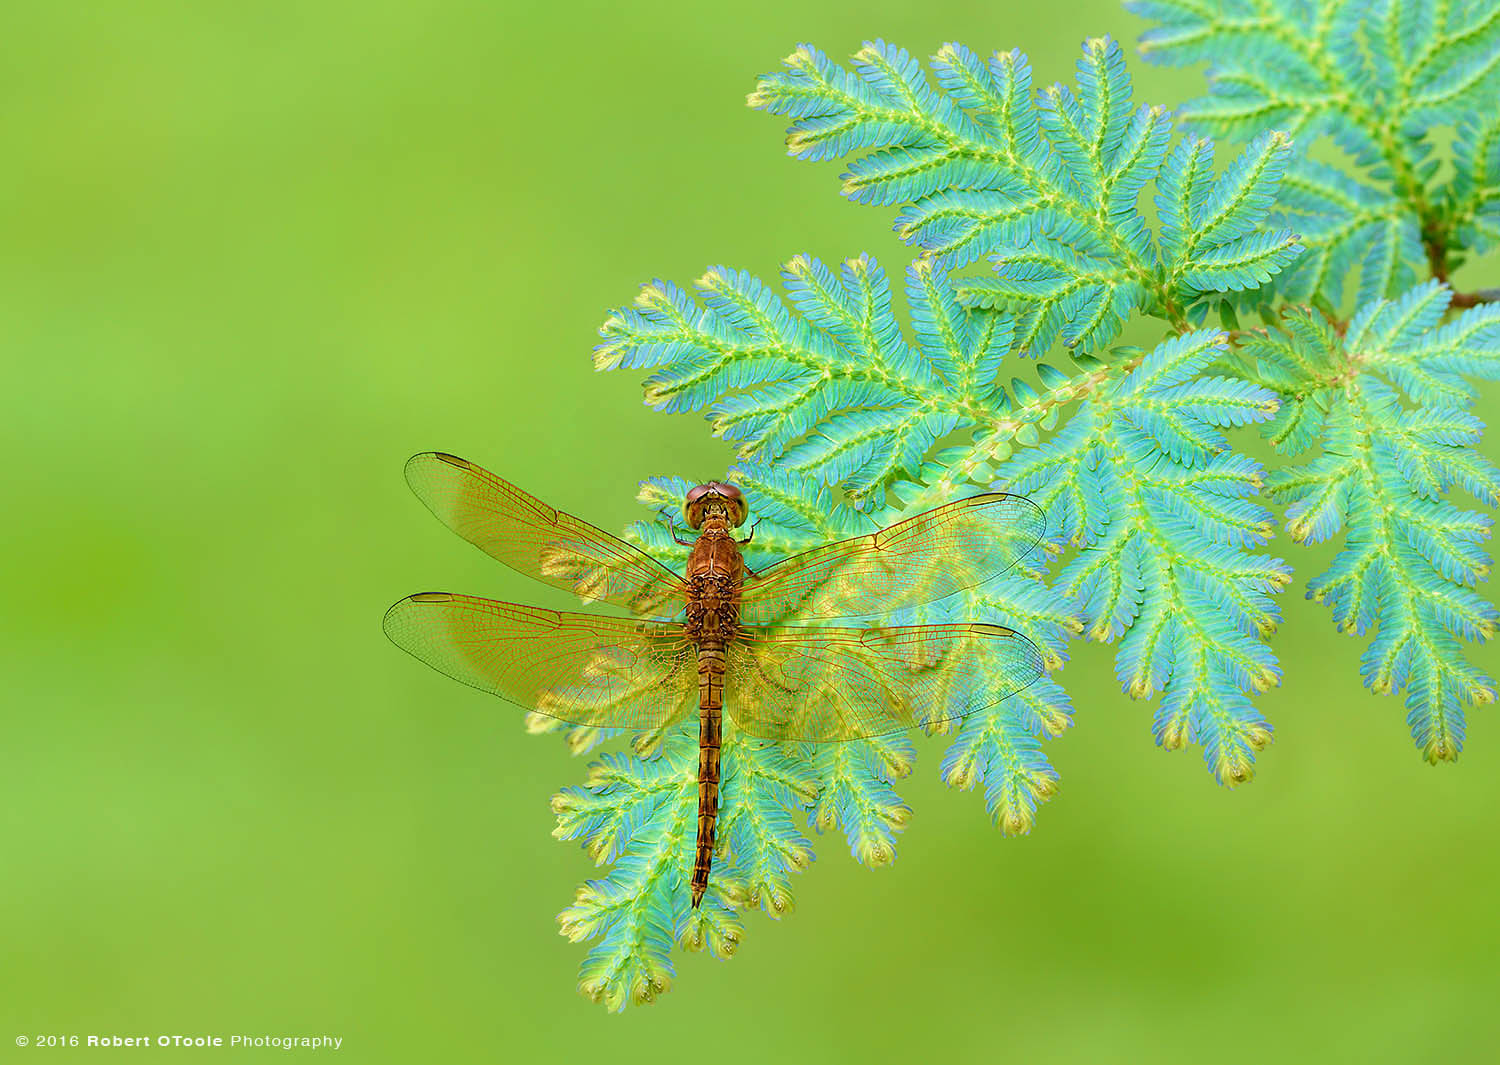 Common Parasol Dragonfly on Peacock Fern